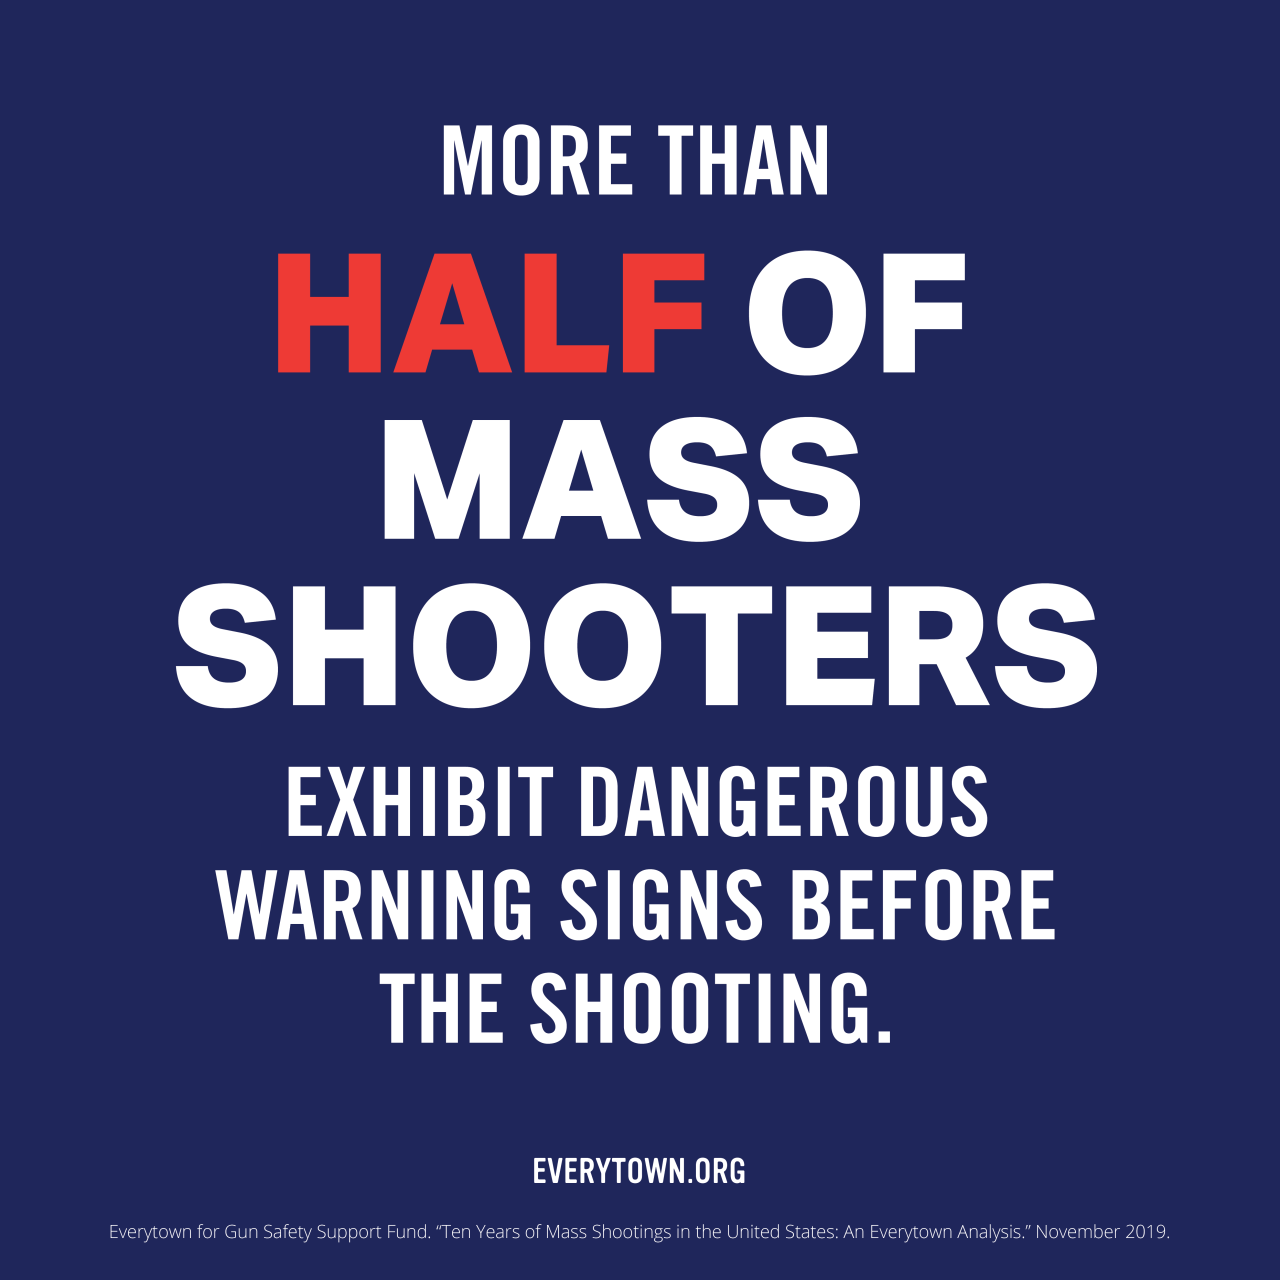 NEW: Click here to read our new analysis of mass shootings, showing that in the decade between 2009 and 2018, there were a total of 194 mass shootings, which left 1,121 people dead and an additional 836 people wounded.
The analysis also includes a...